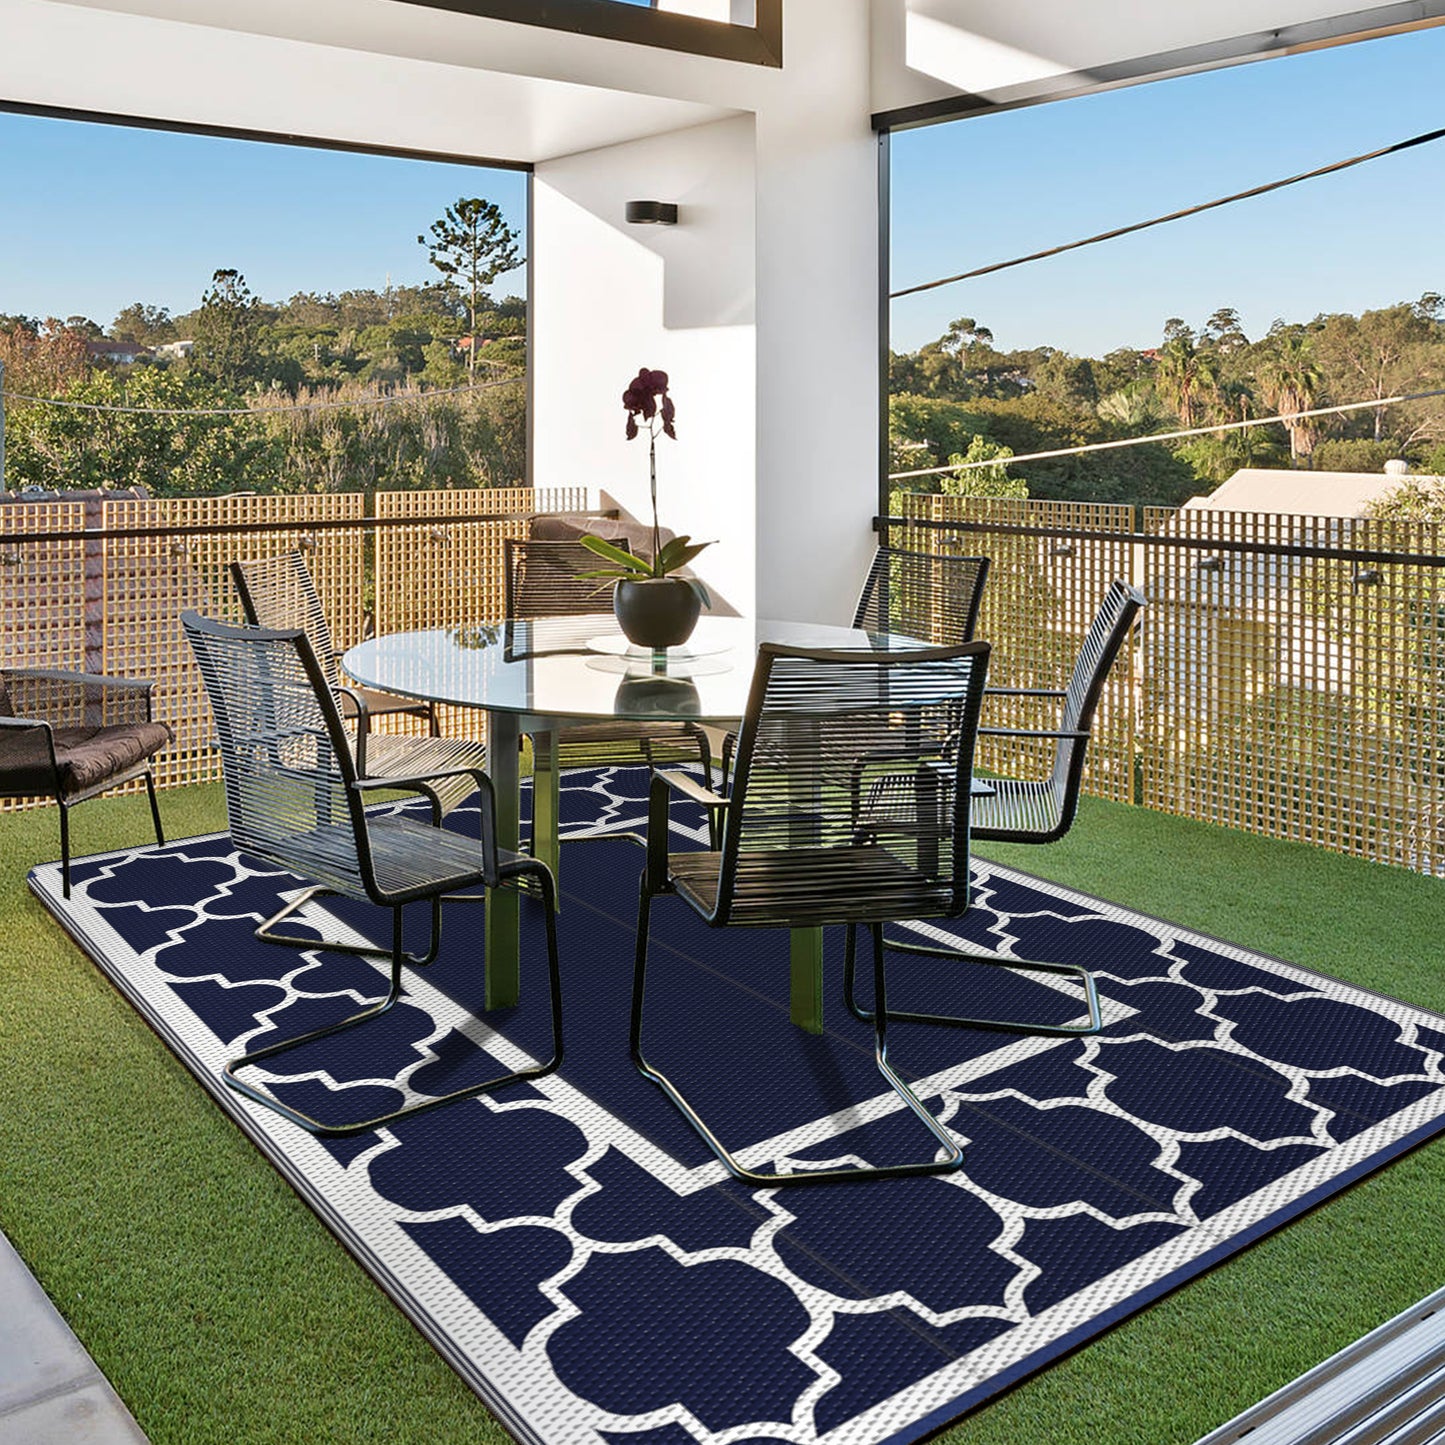 GENIMO Outdoor Rug for Patio,Reversible Plastic Waterproof Rugs,Clearance Mat,Rv,Camping,Deck,Porch,Camper,Balcony